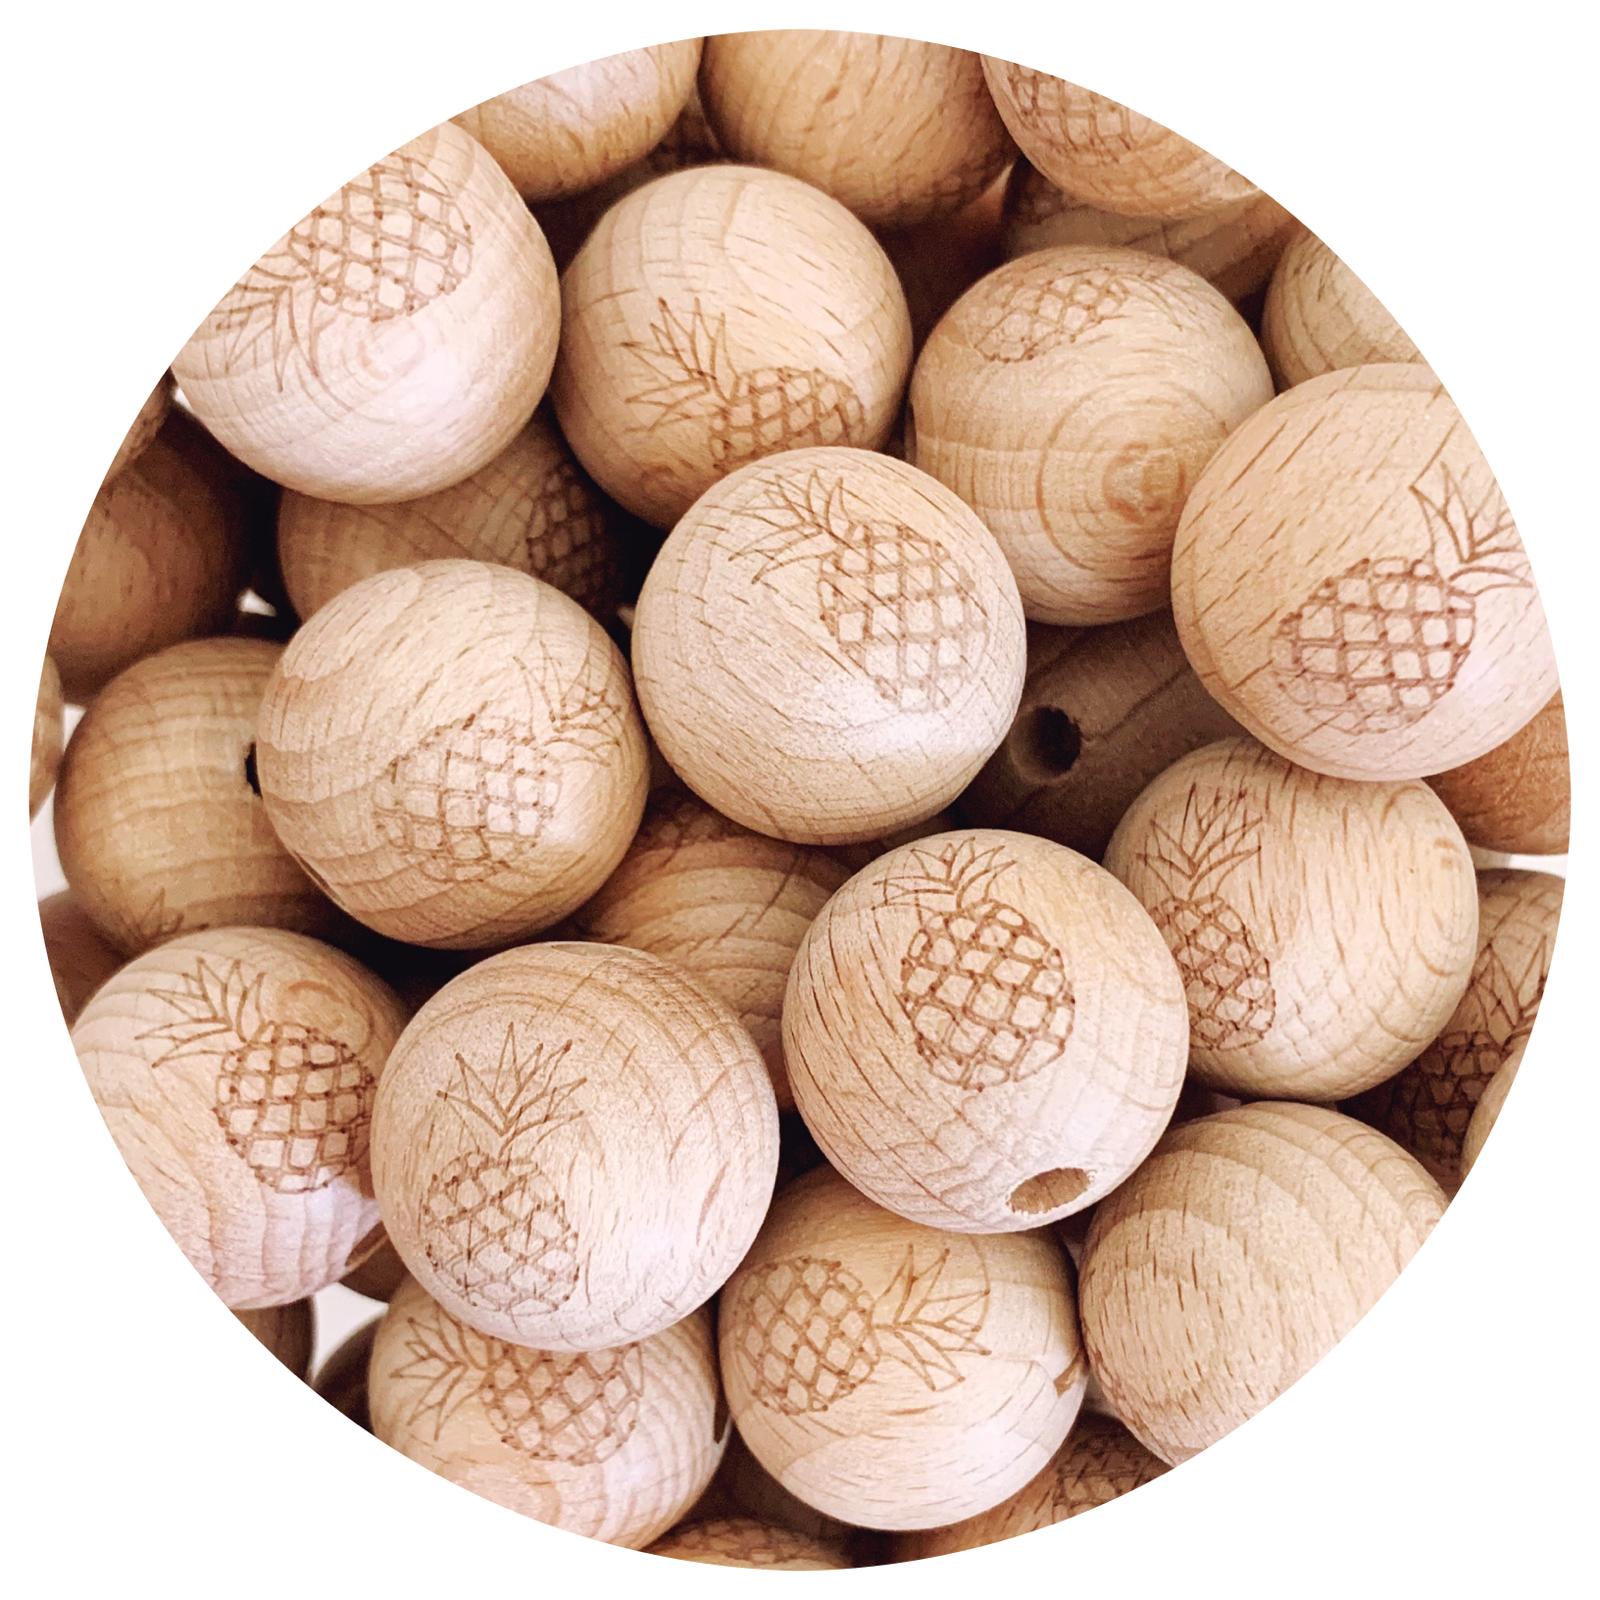 Beech Wood Engraved Beads (Pineapple) - 20mm Round - 5 beads *CLEARANCE*